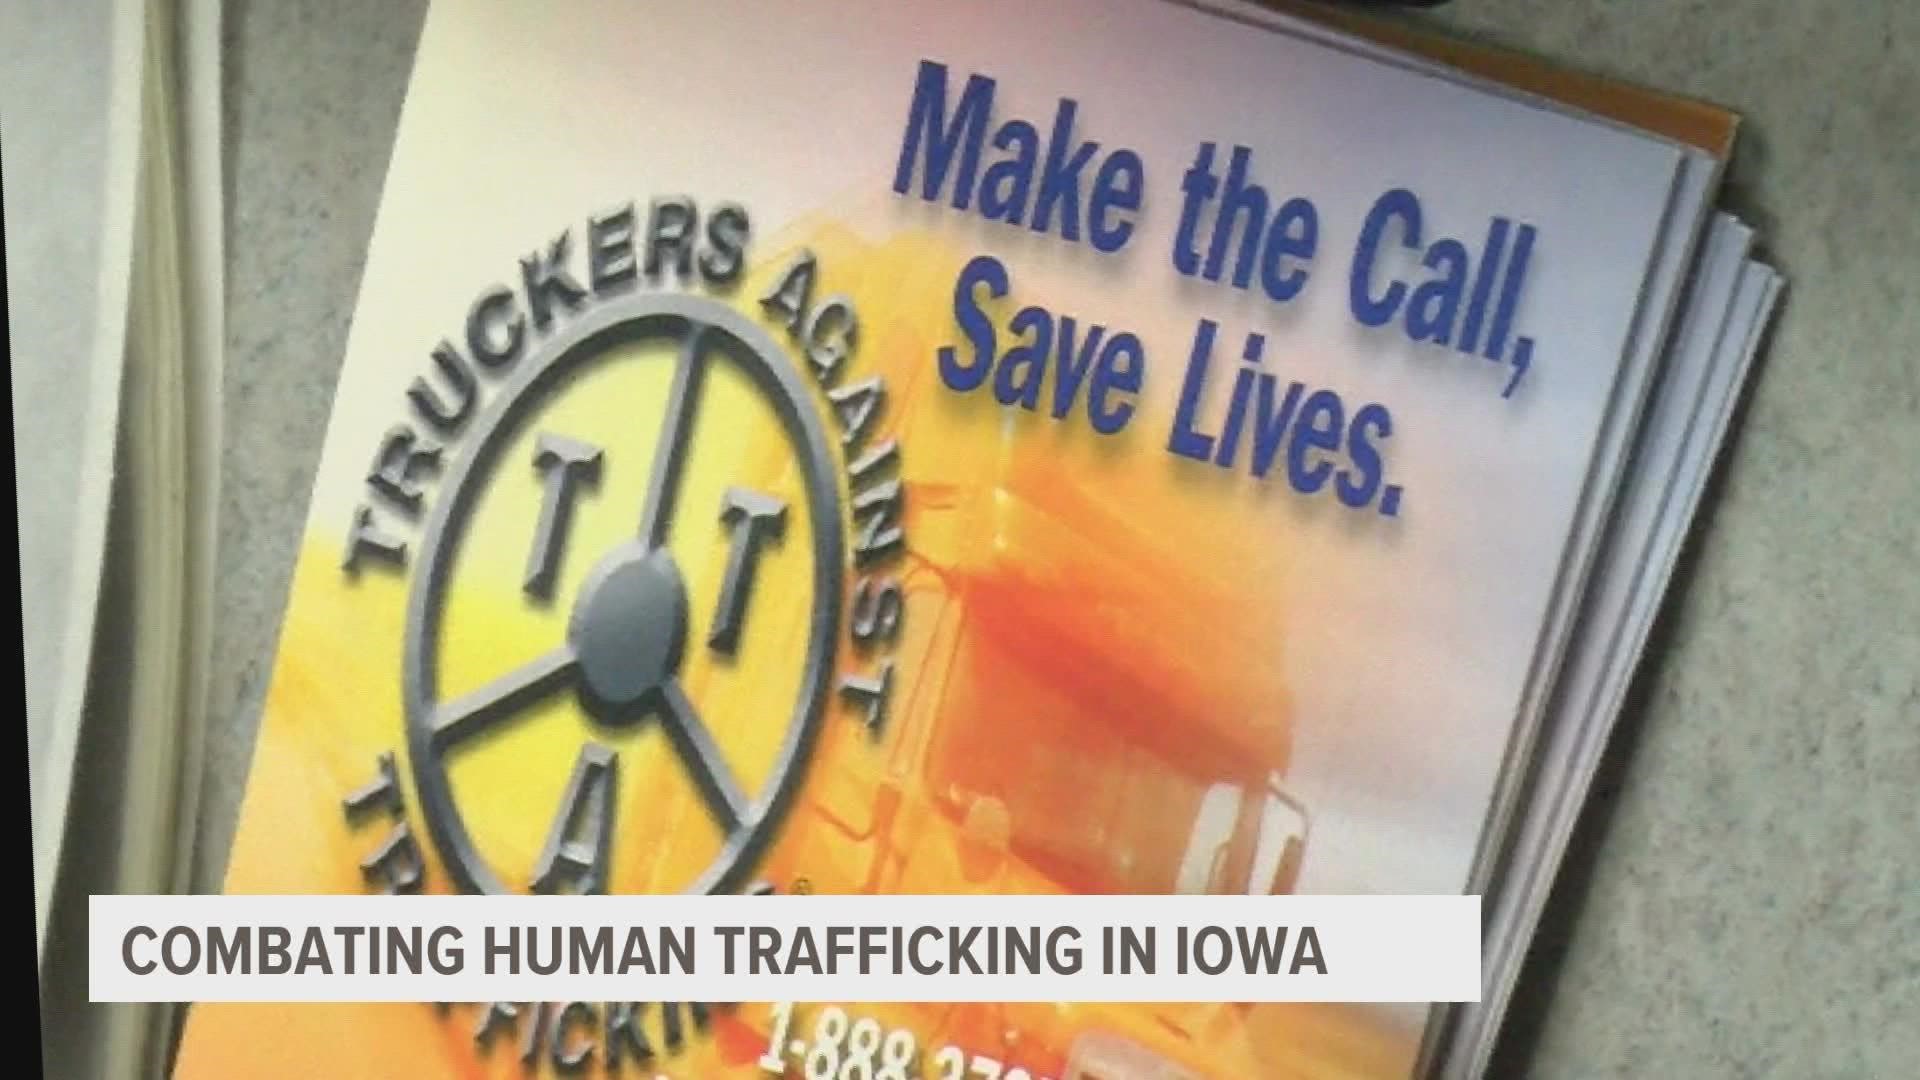 In 2020, 78 human trafficking cases were reported in Iowa.